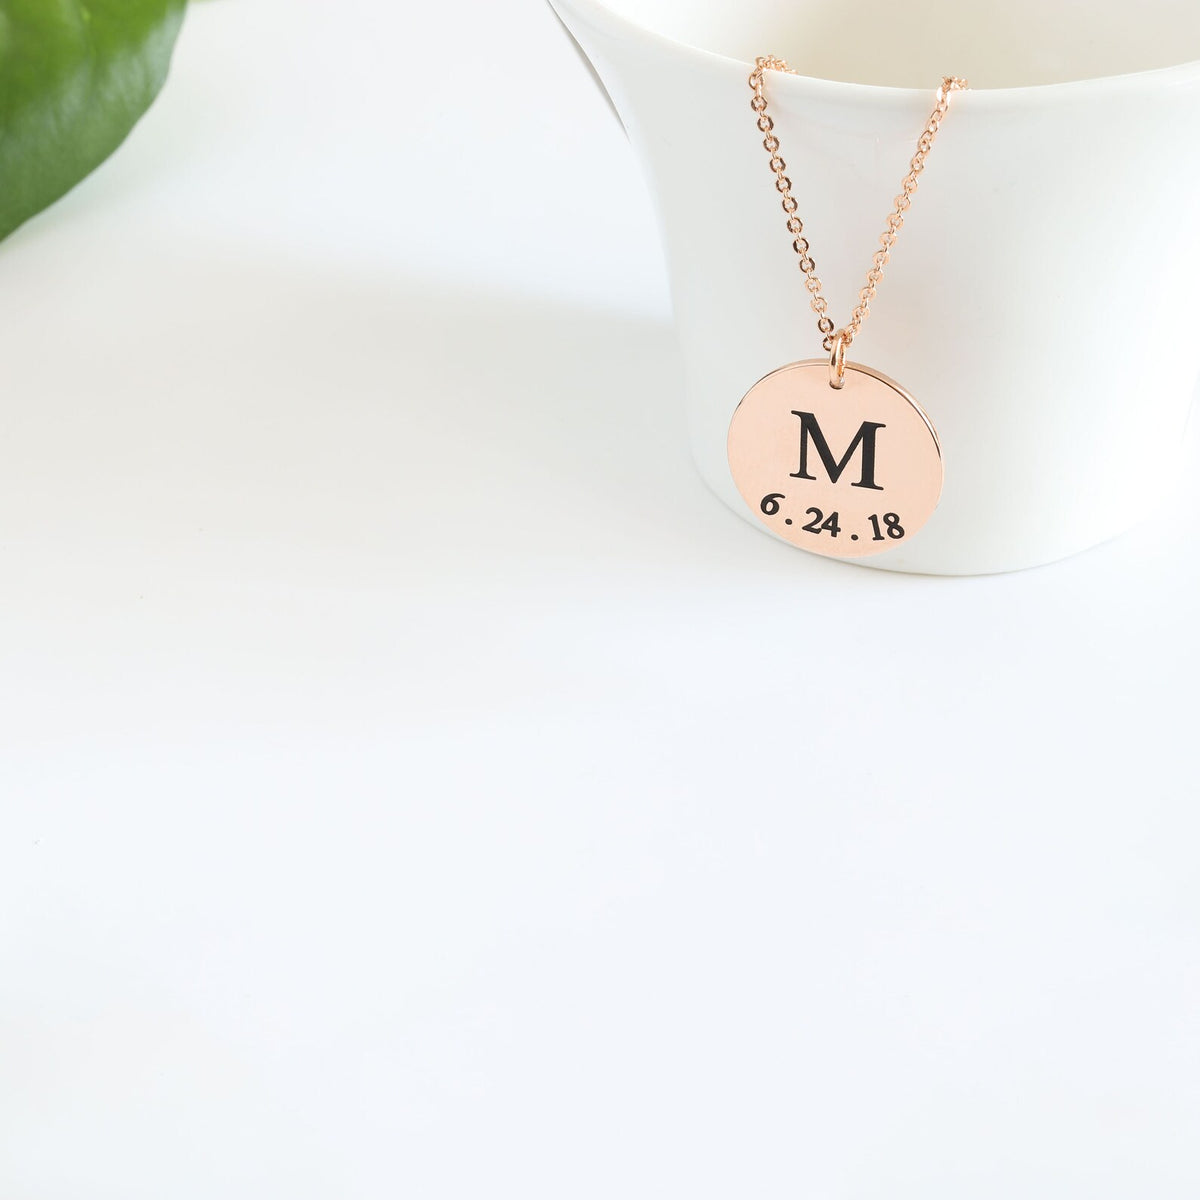 Circle Of Love Necklace